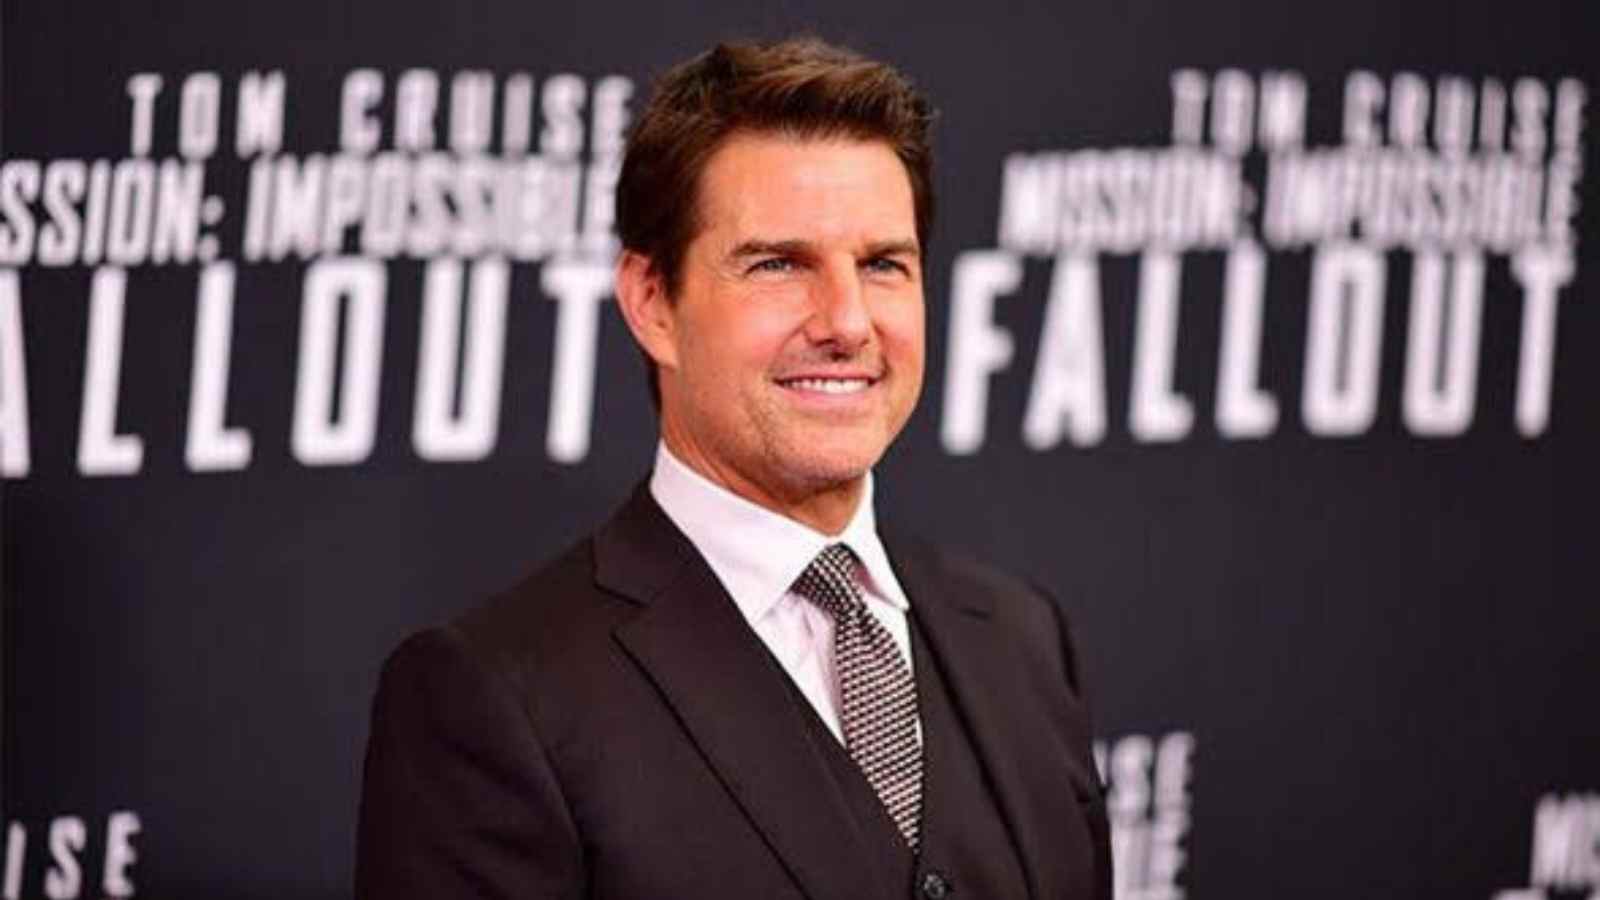 Mission Impossible Increased Tom Cruise's pay to $200 million